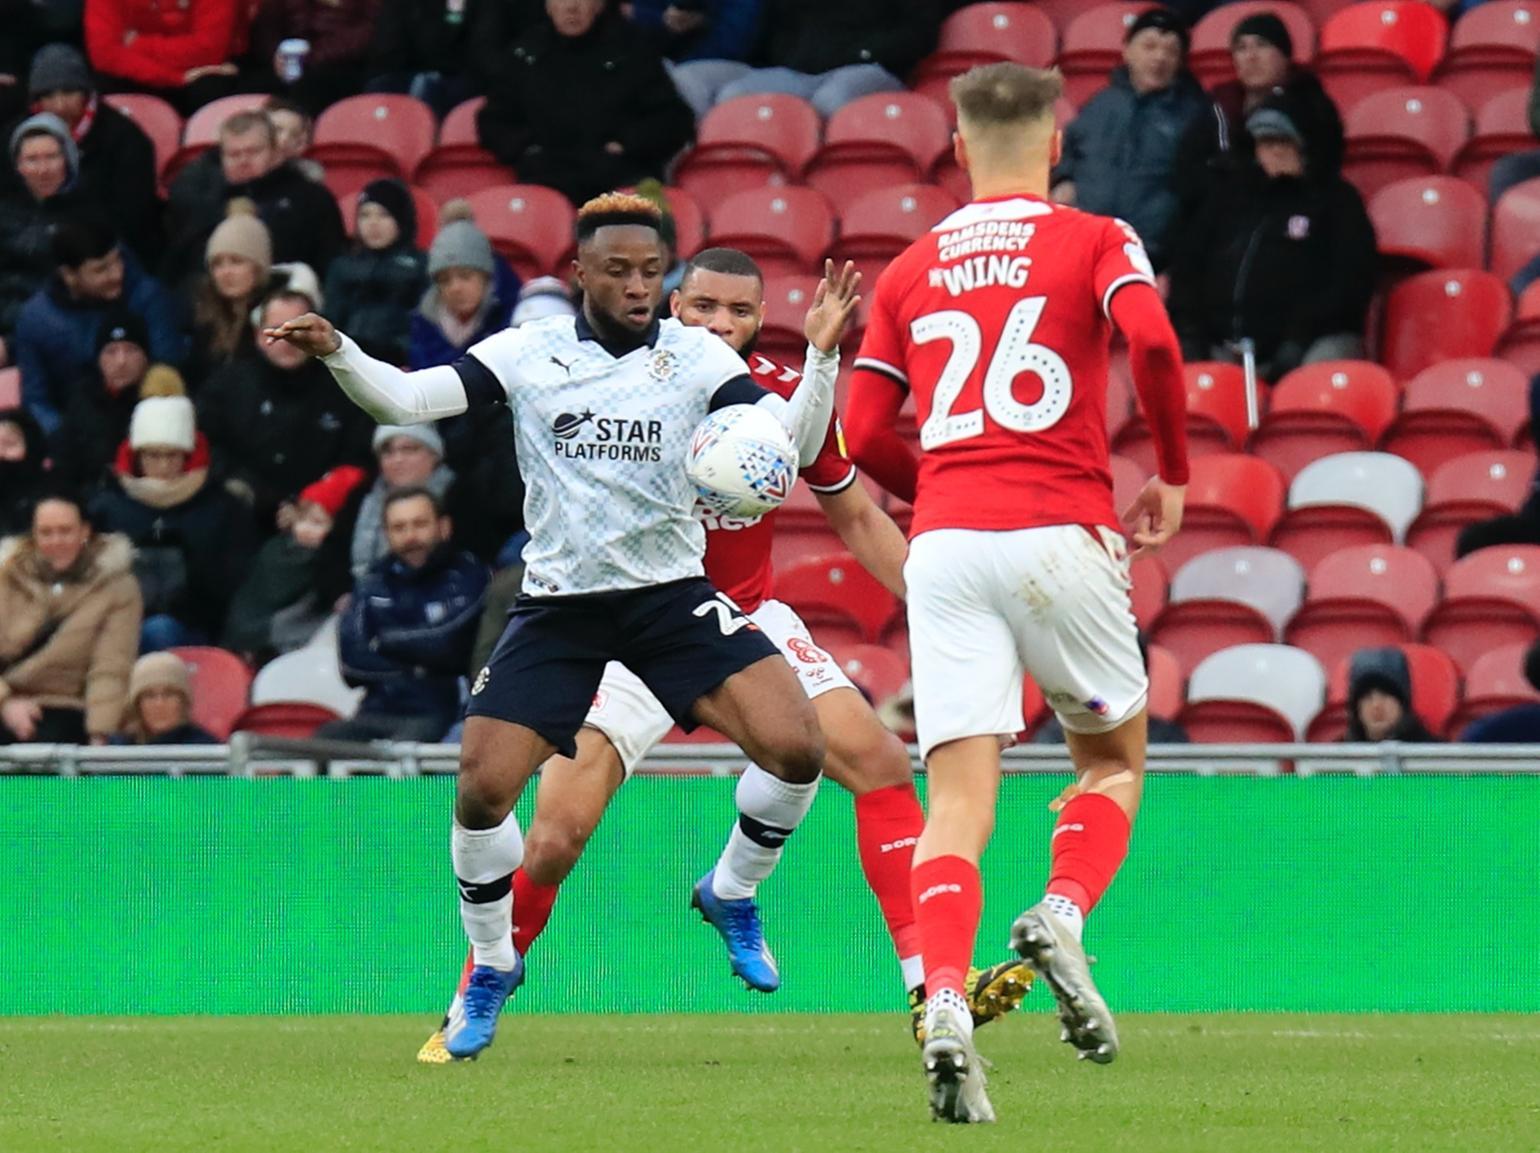 Annoyed the hell out of the Boro back-line as they often resorted to fouling him in dangerous areas. Intelligently picked out Mpanzu twice, while one 50-yard recovery run and sliding challenge showed the commitment on display.